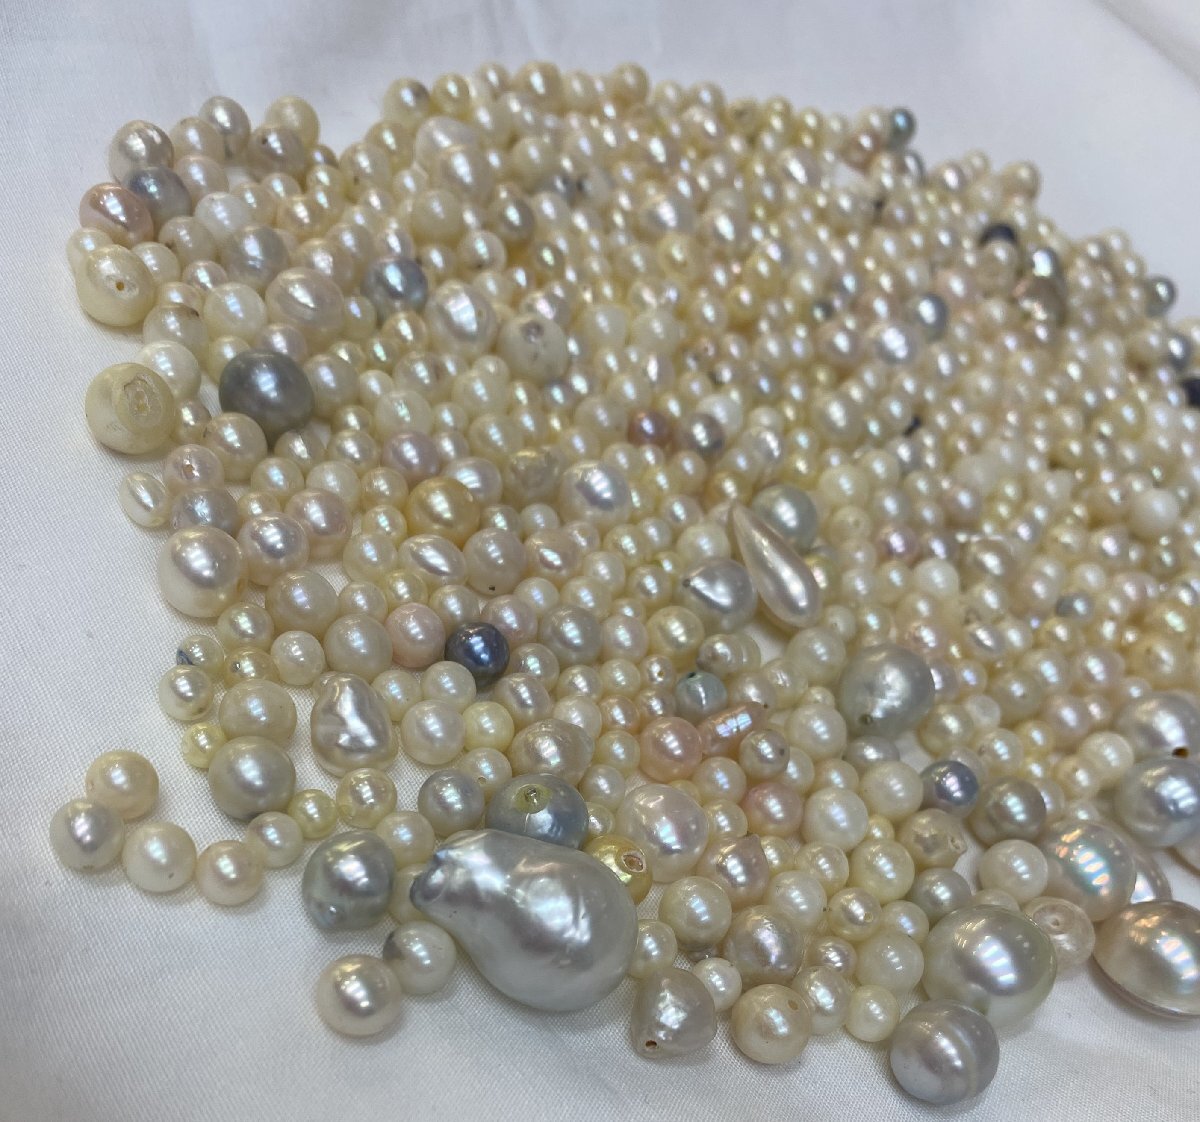 [5CM higashi 05002E]*1 jpy start *book@ pearl * pearl * loose * approximately 250g* unset jewel *mabe pearl * Akoya pearl * south . pearl * accessory * summarize 